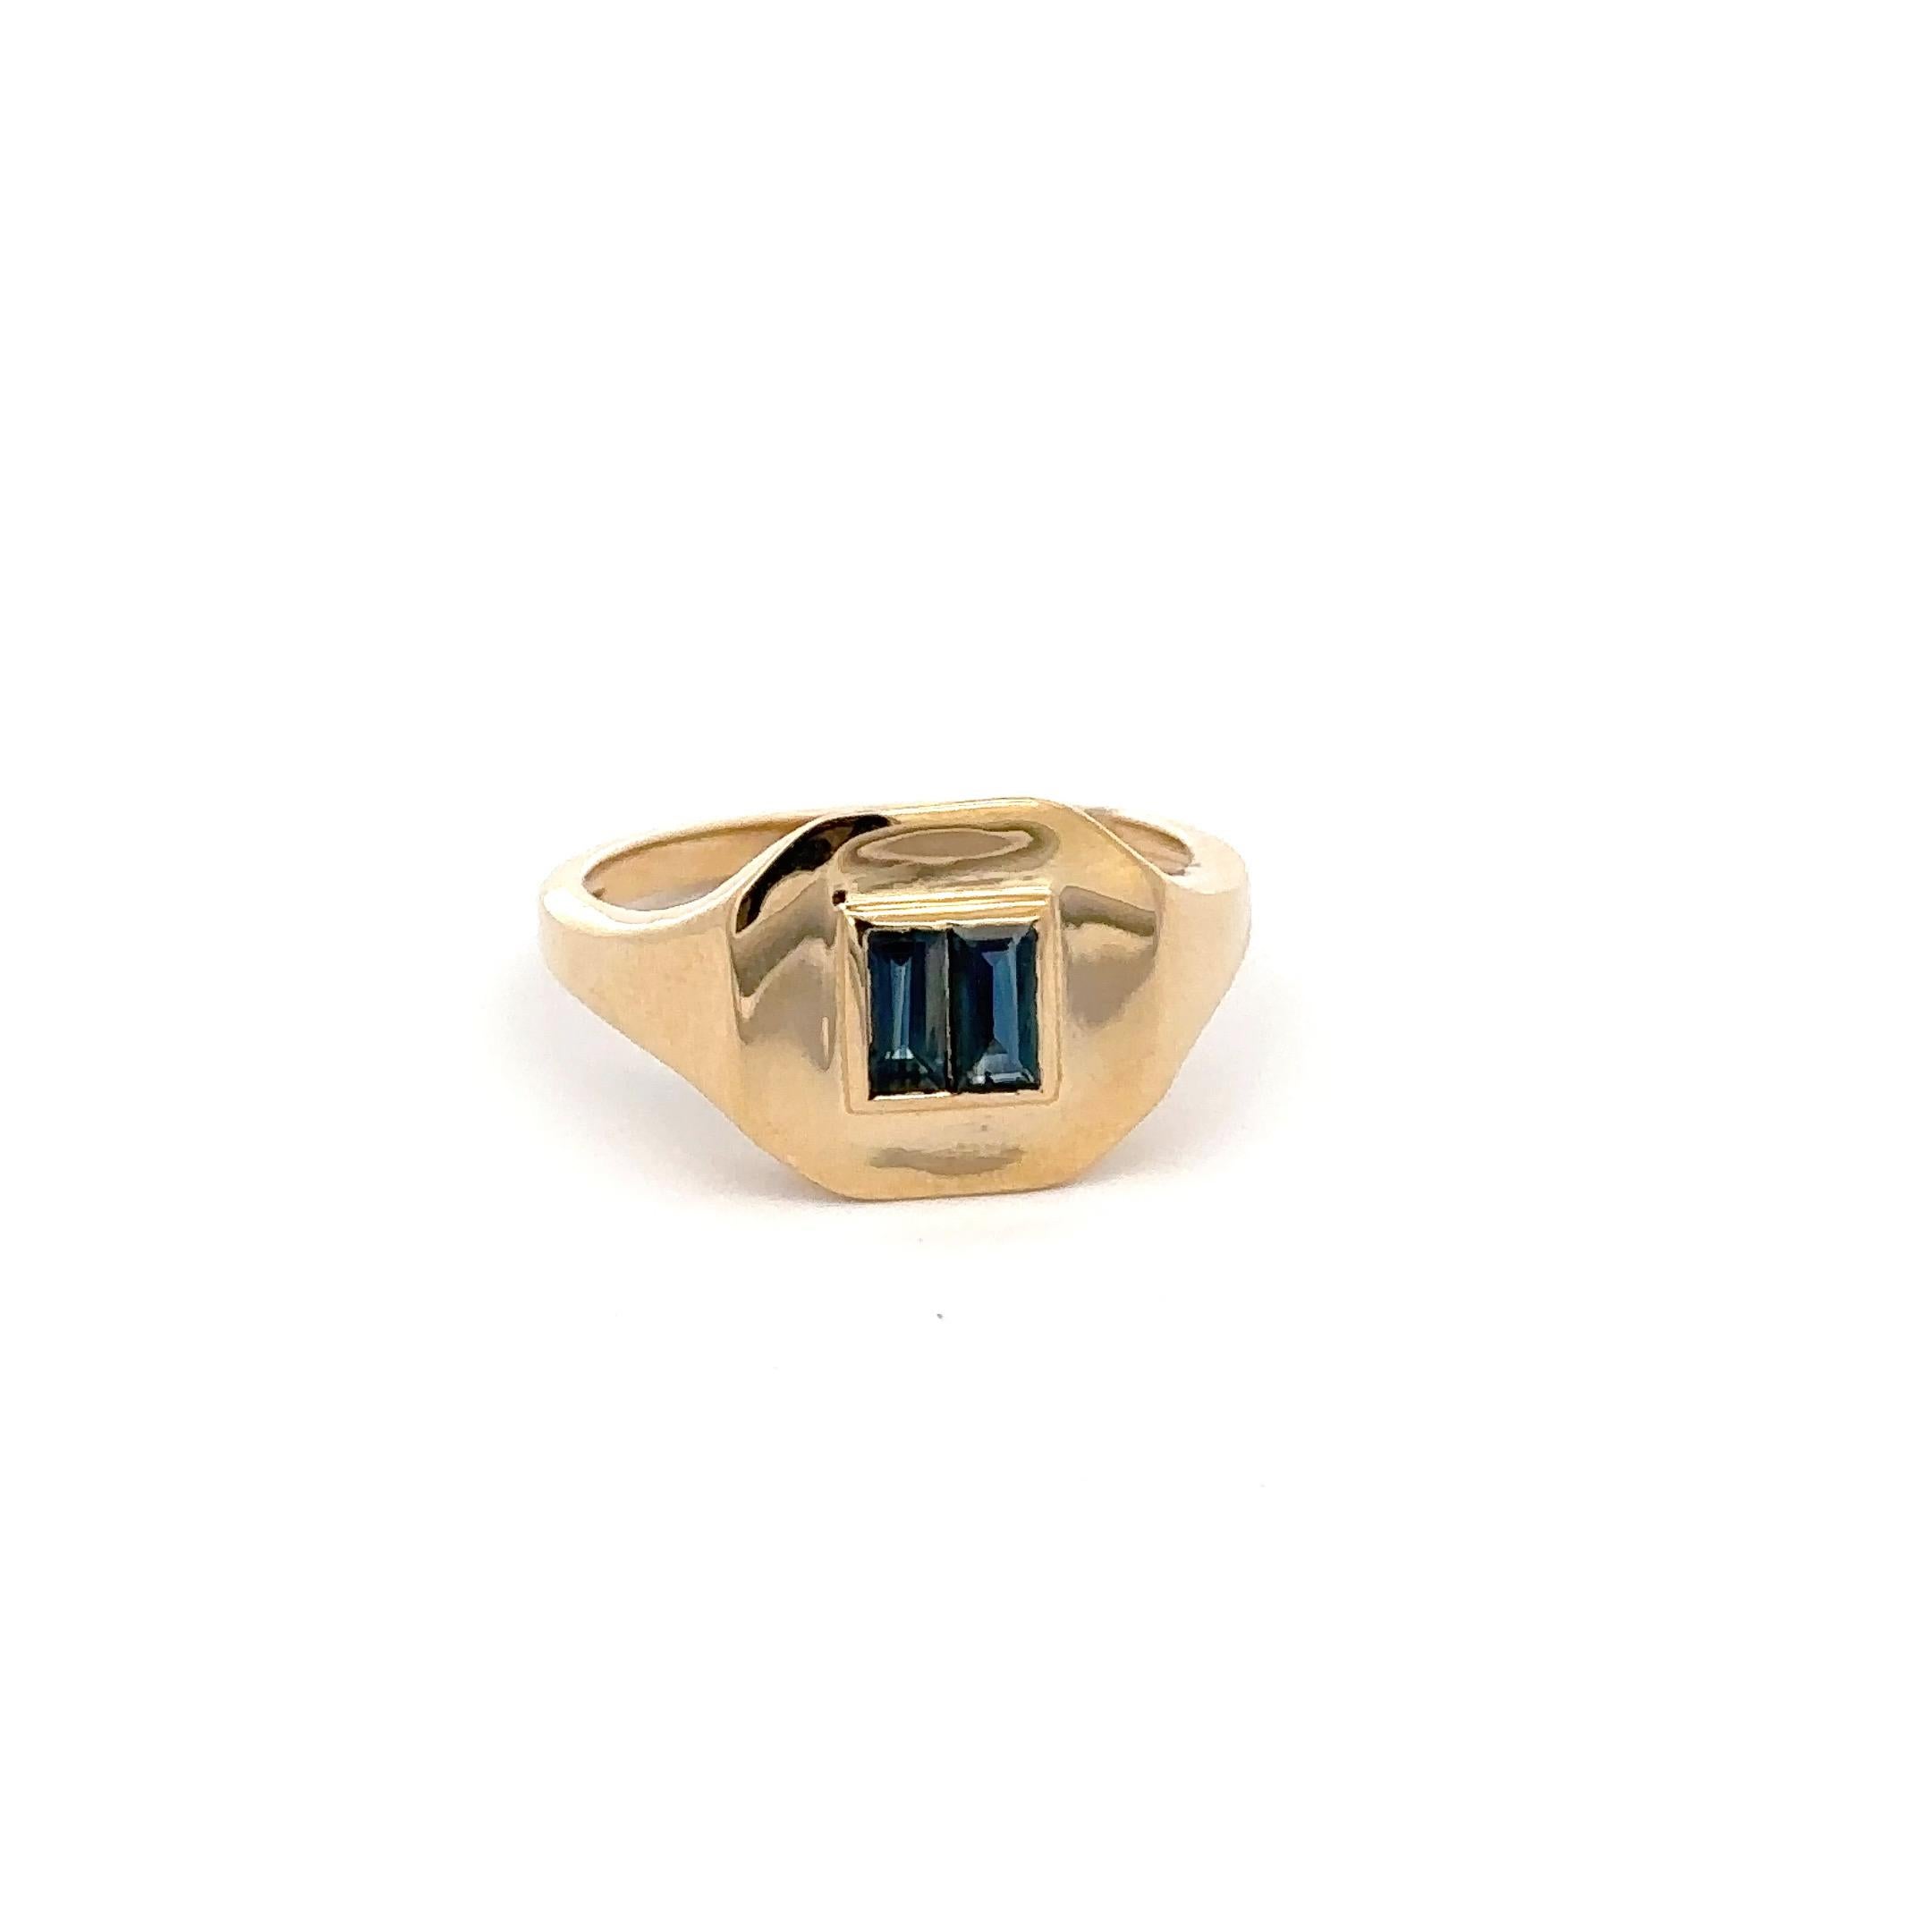 For Sale:  Blue Sapphire Signet Pinky Finger Ring in 14kt Solid Yellow Gold 9